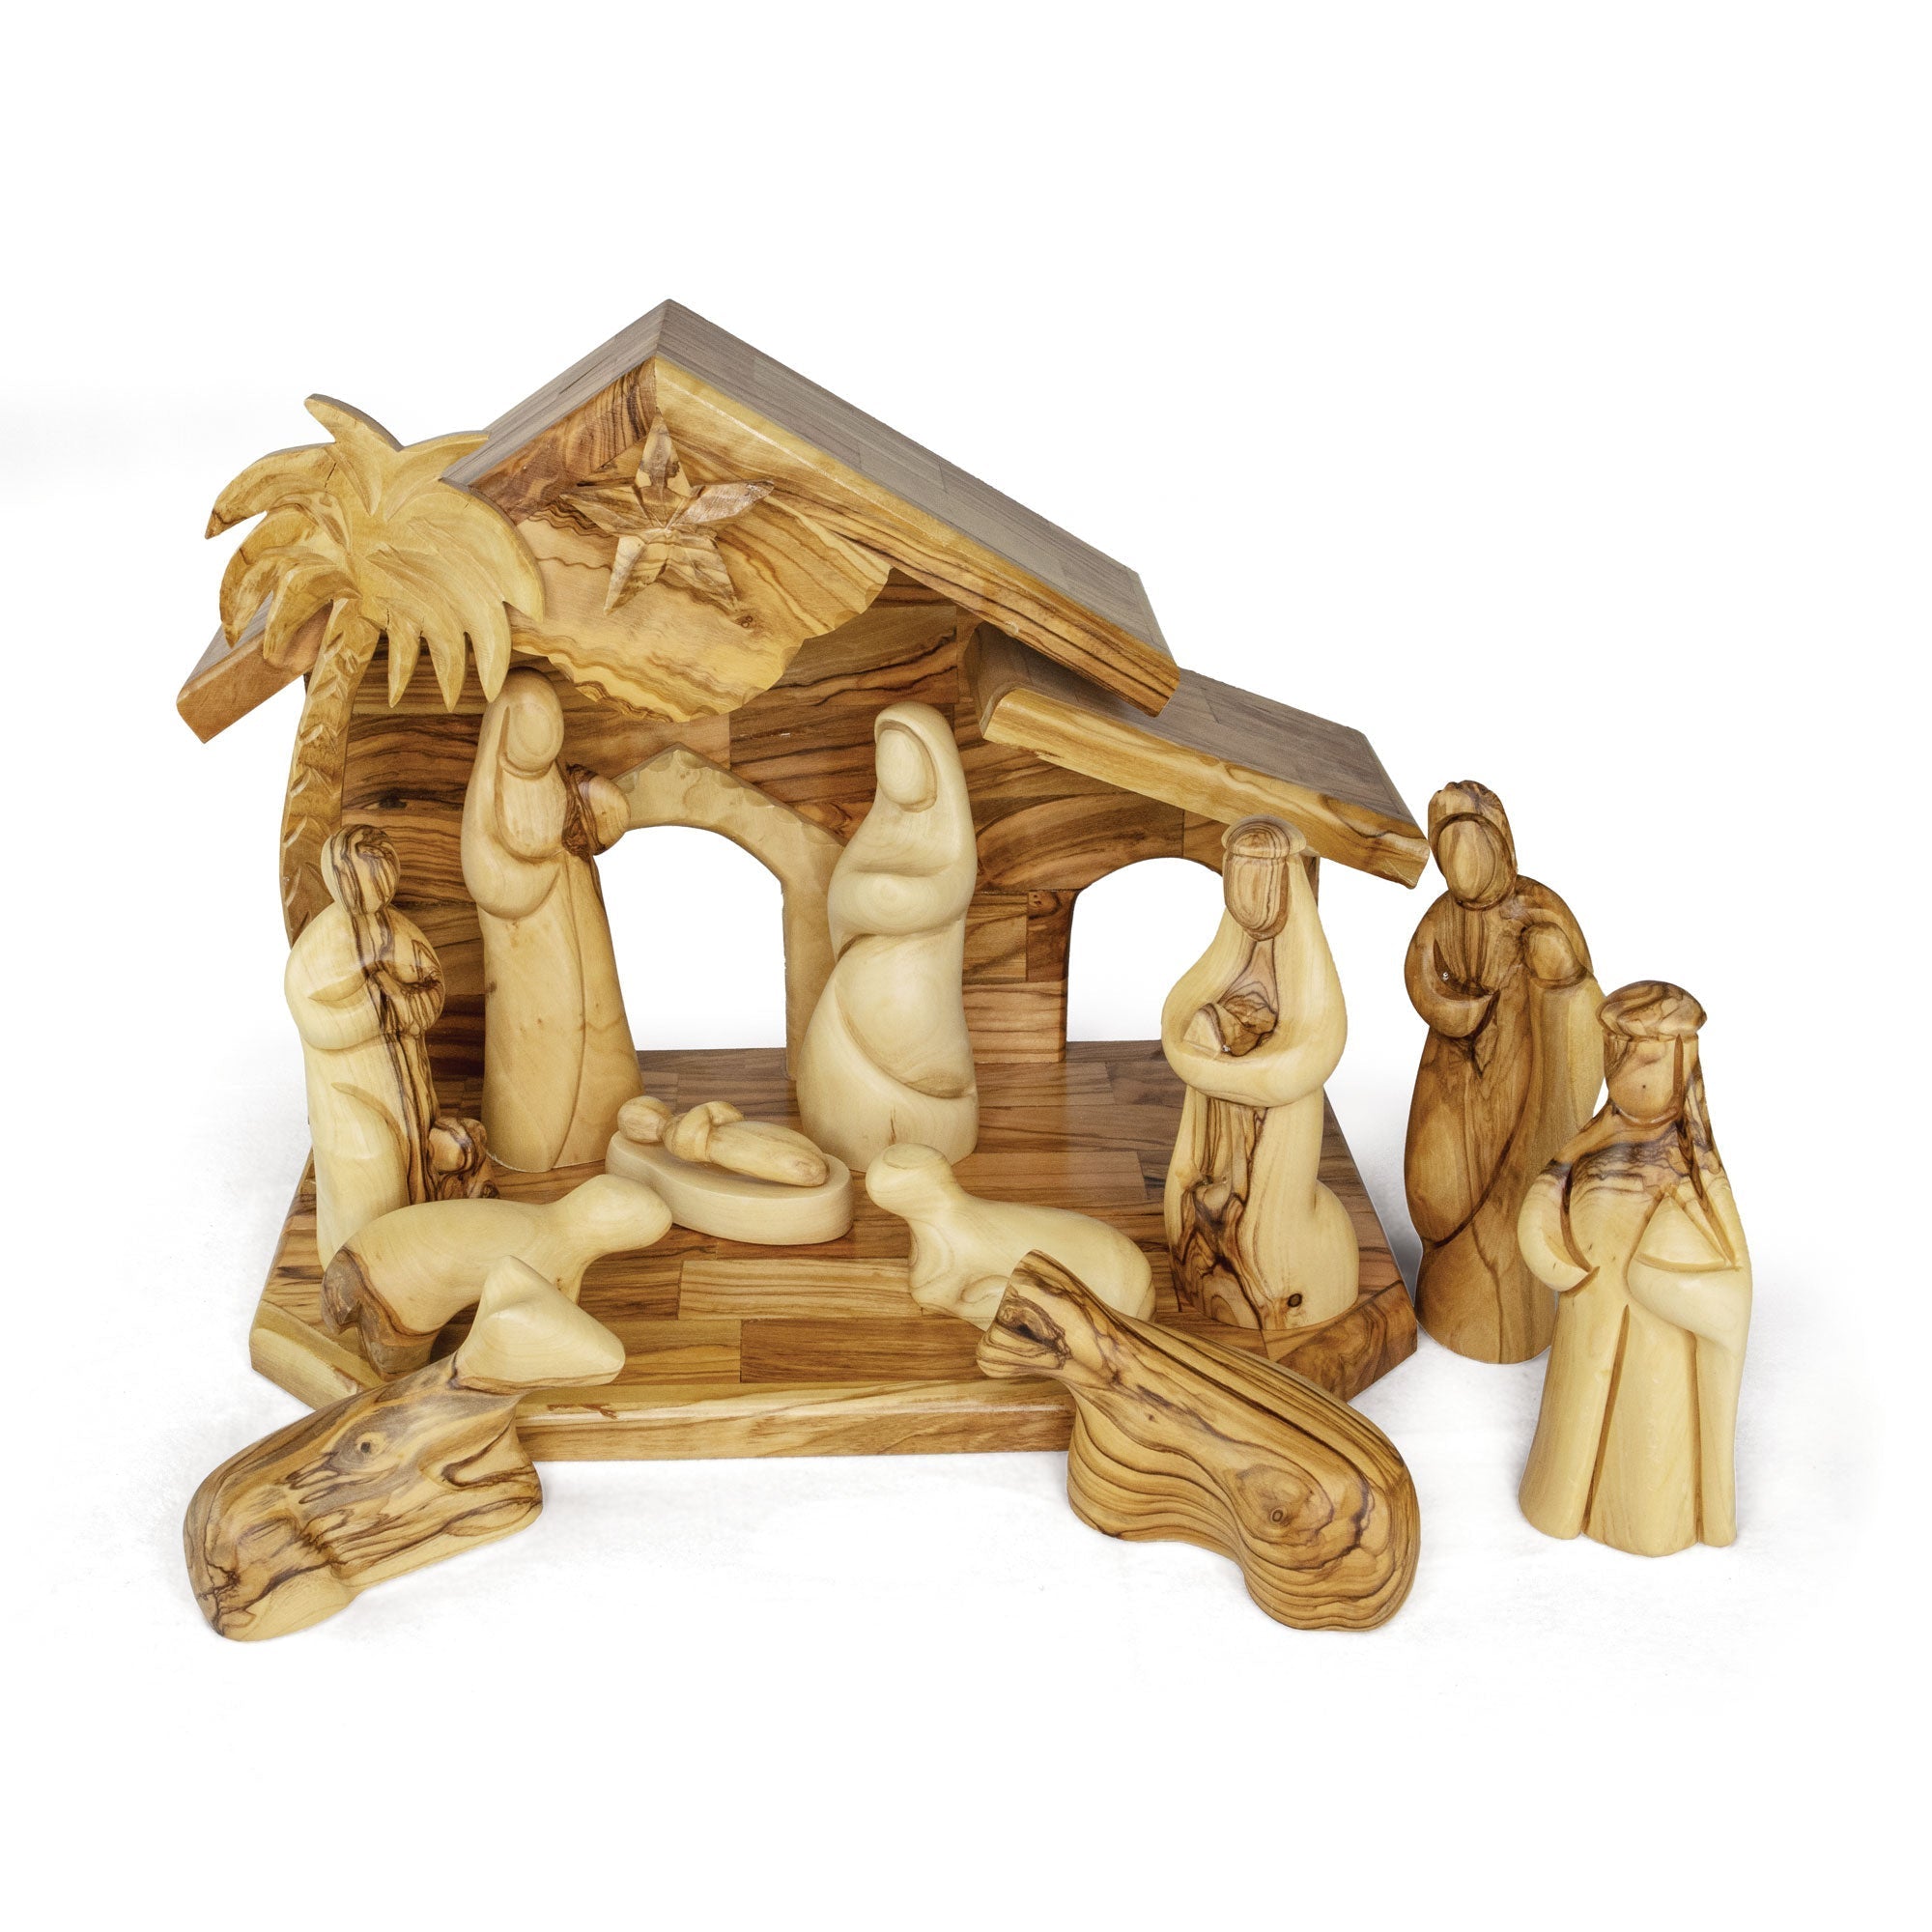 Holy Land Olive Wood Nativity with Medium Stable and Large Faceless Figurines